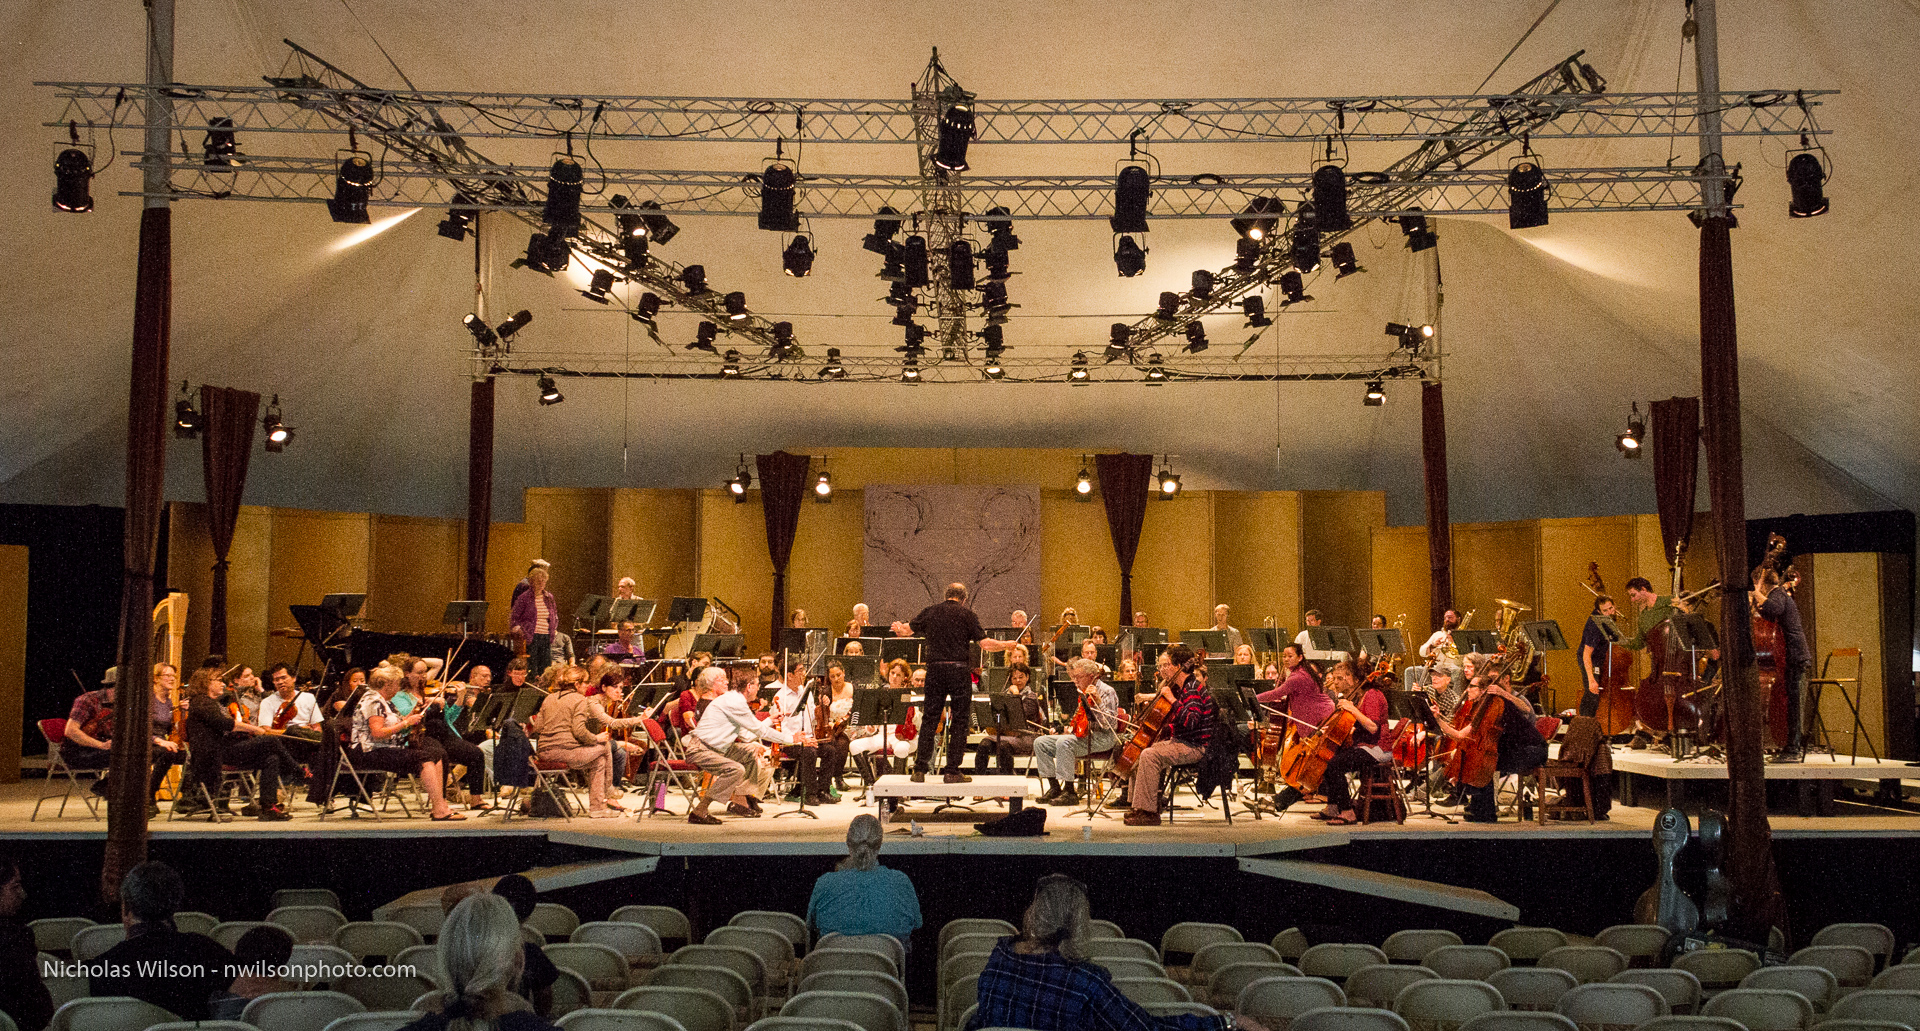 The Mendocino Music Festival 2015 Orchestra in rehearsal for opening night.